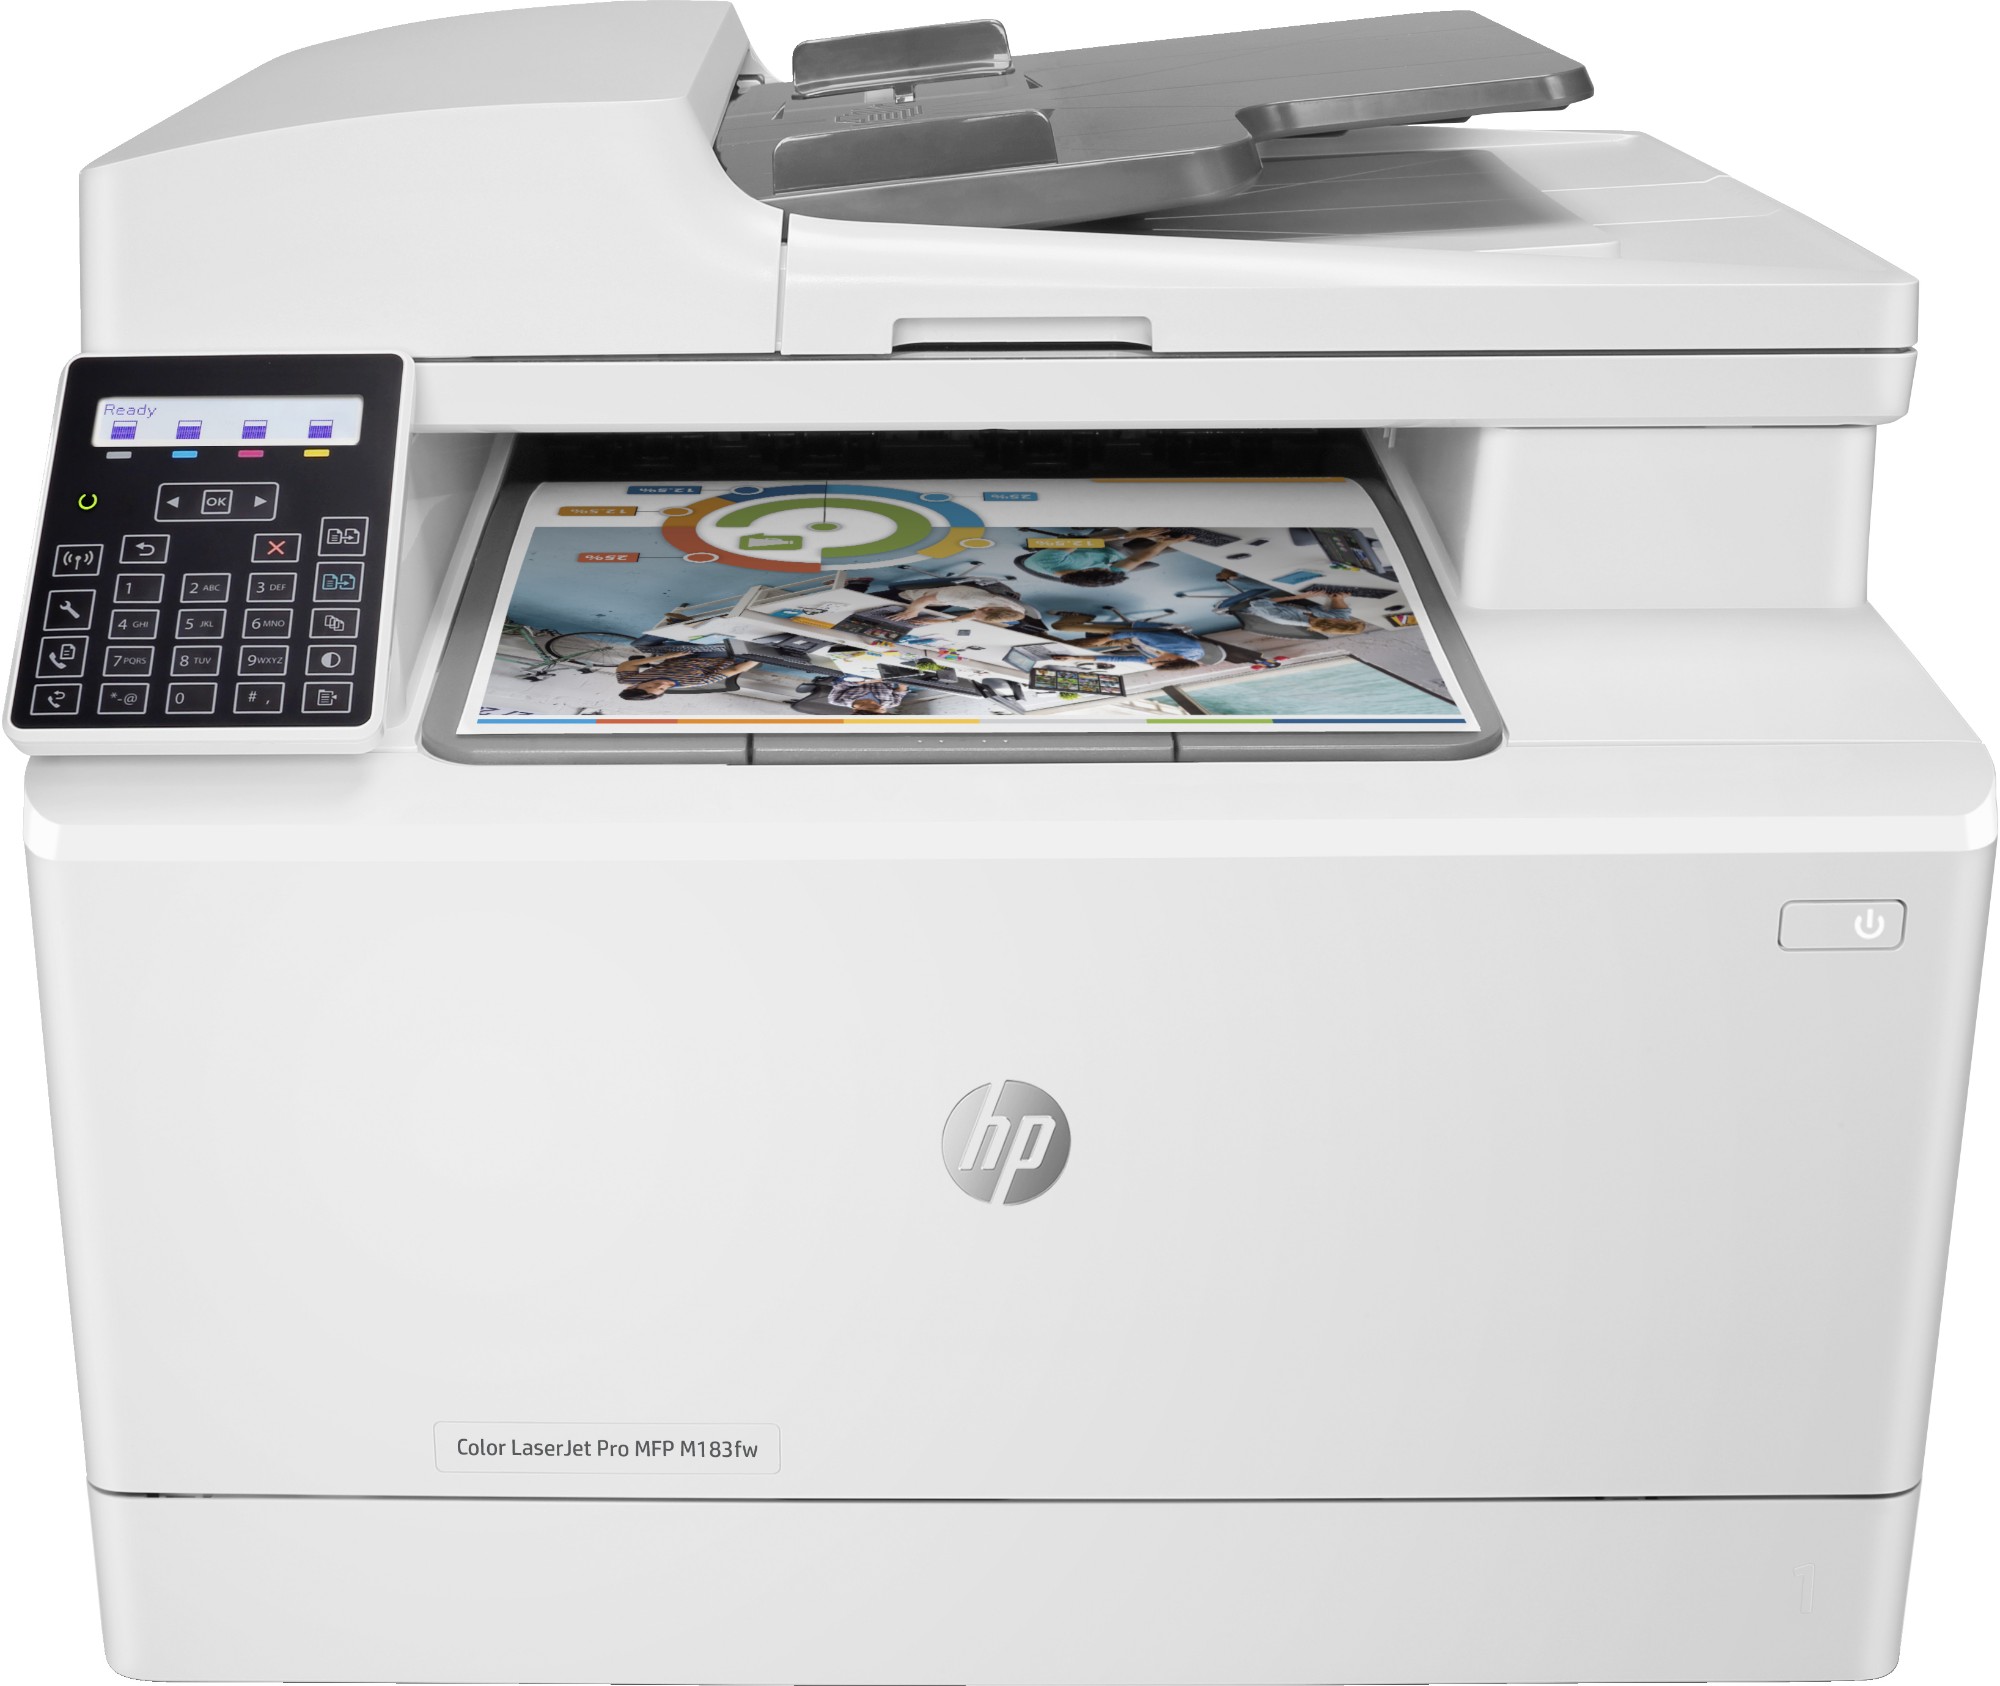 HP Colour LaserJet Pro MFP M183fw, Print, Copy, Scan, Fax, 35-sheet ADF; Energy Efficient; Strong Security; Dualband Wi-Fi